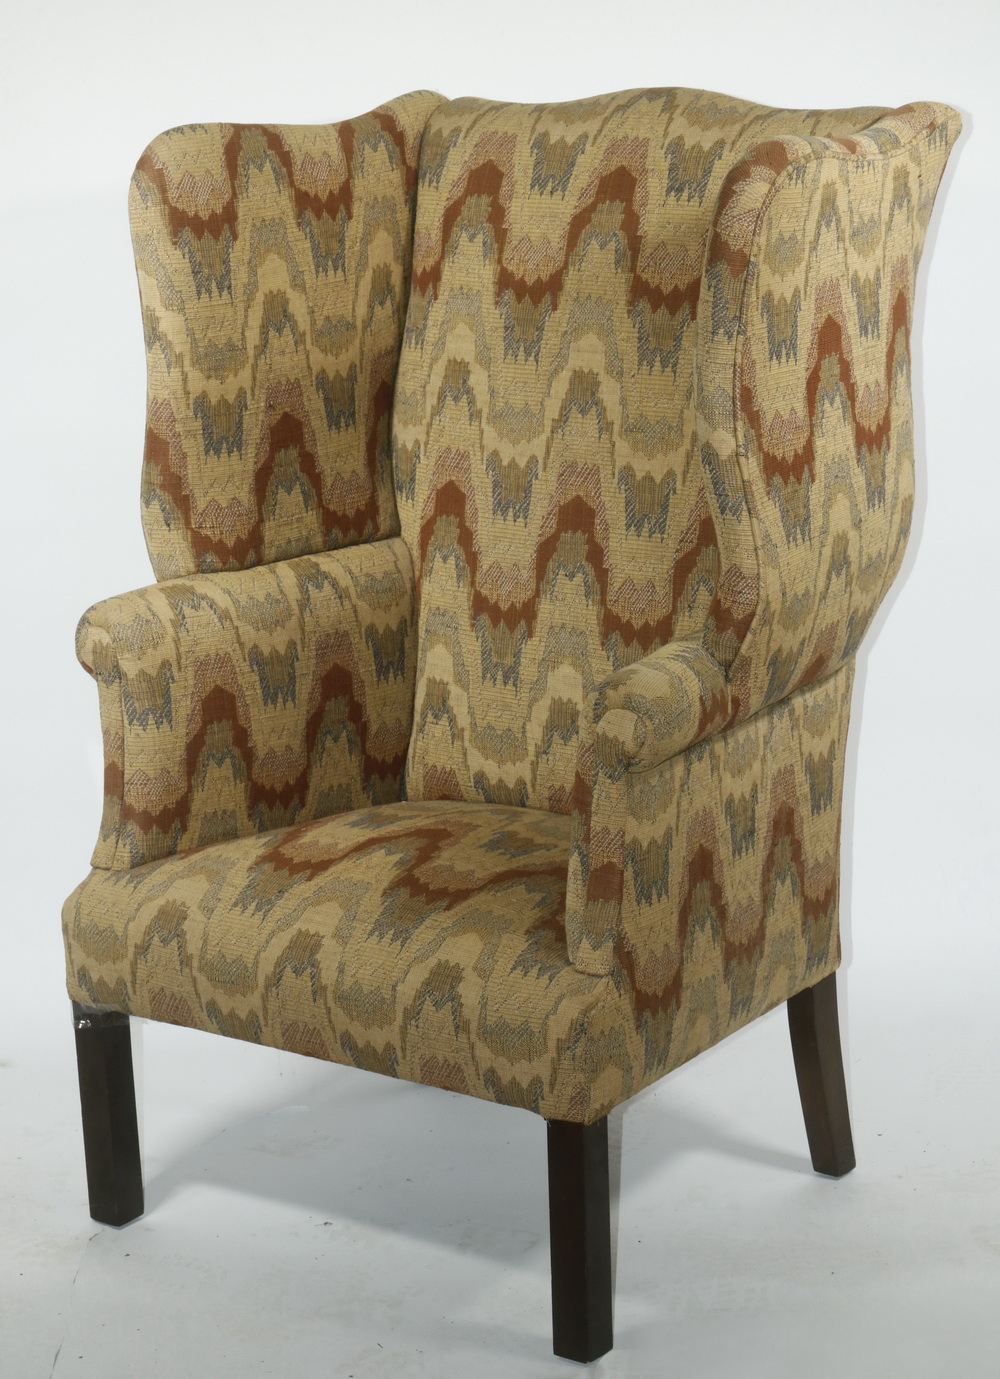 CUSTOM MADE CONTEMPORARY WING CHAIR 2b50ad